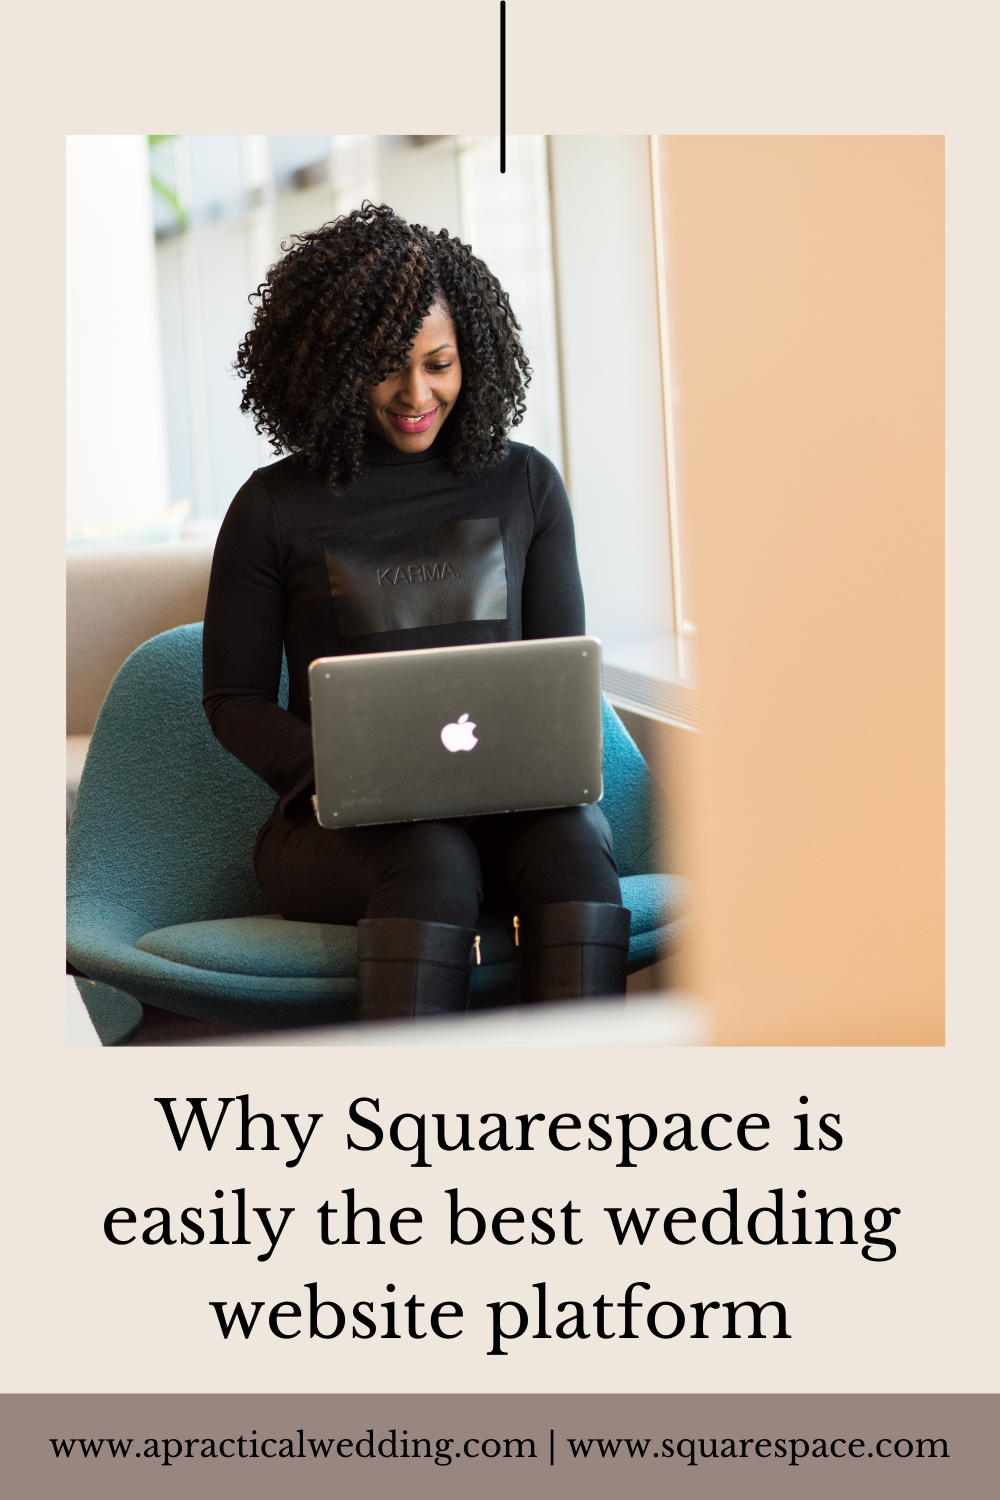 Image of woman on her laptop with the words "Why Squarespace is easily the best wedding website platform"